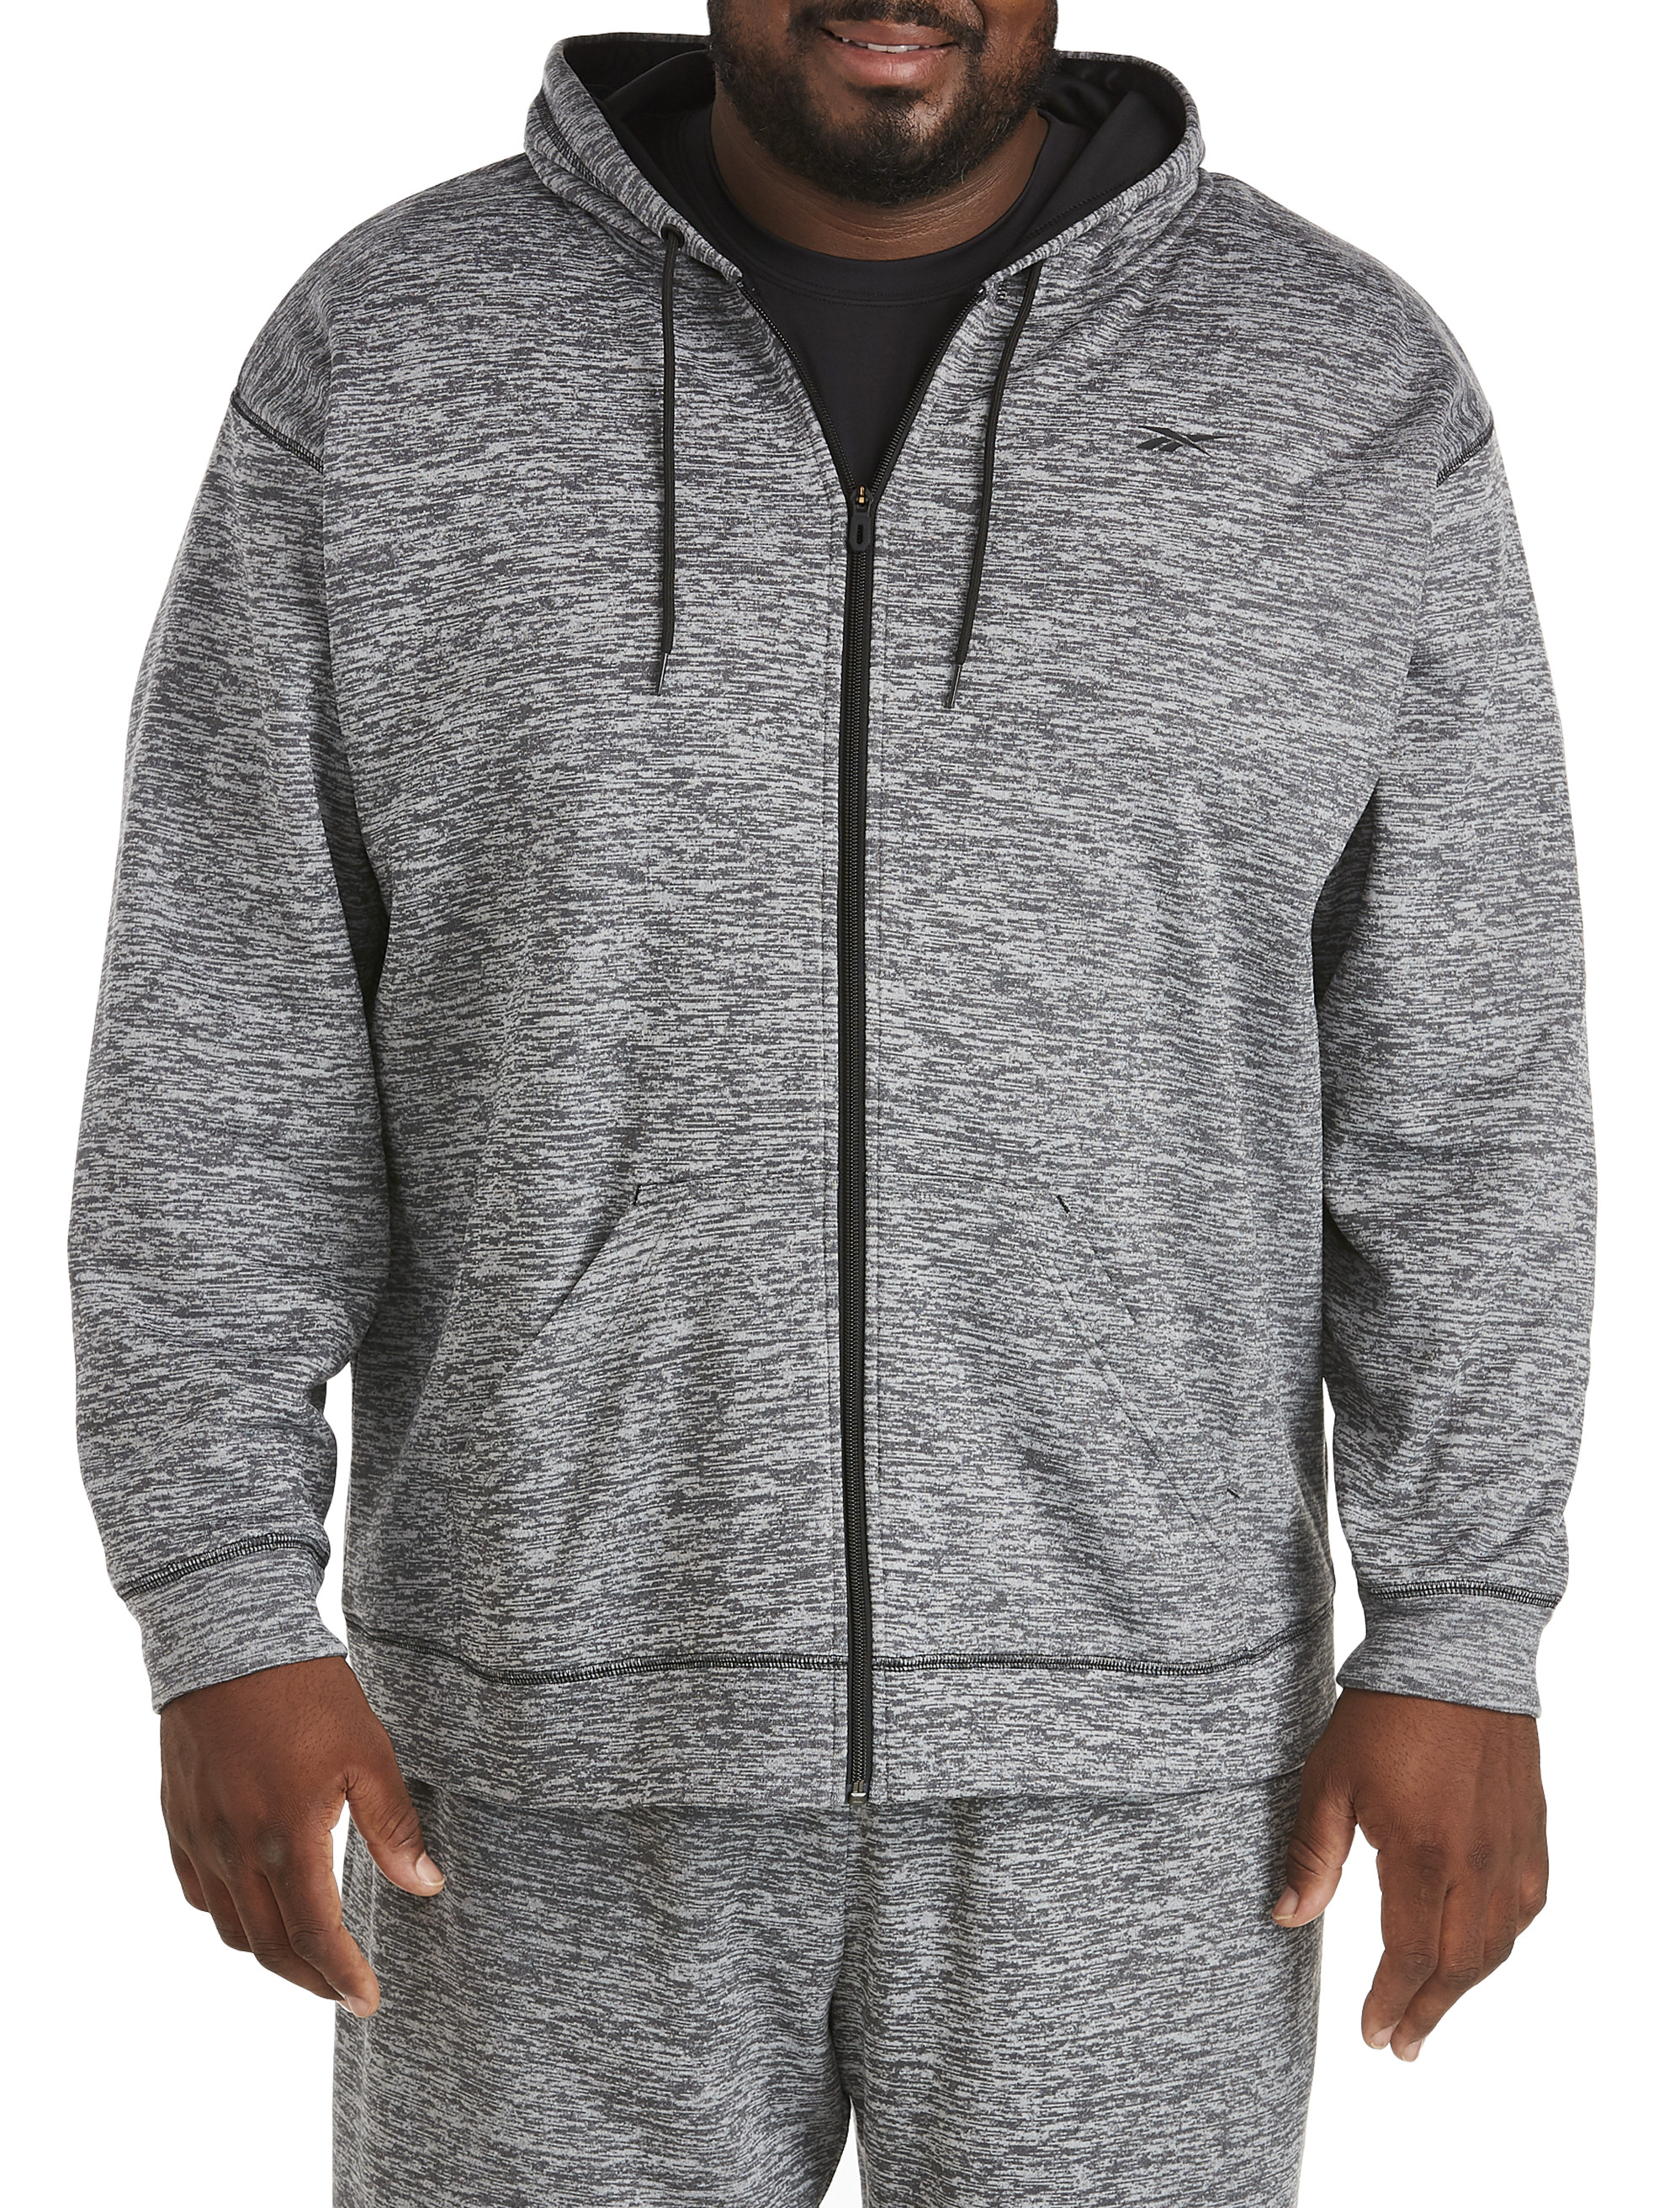 Tall Men's Full Zip Hooded Sweatshirt - Redwood Tall Outfitters